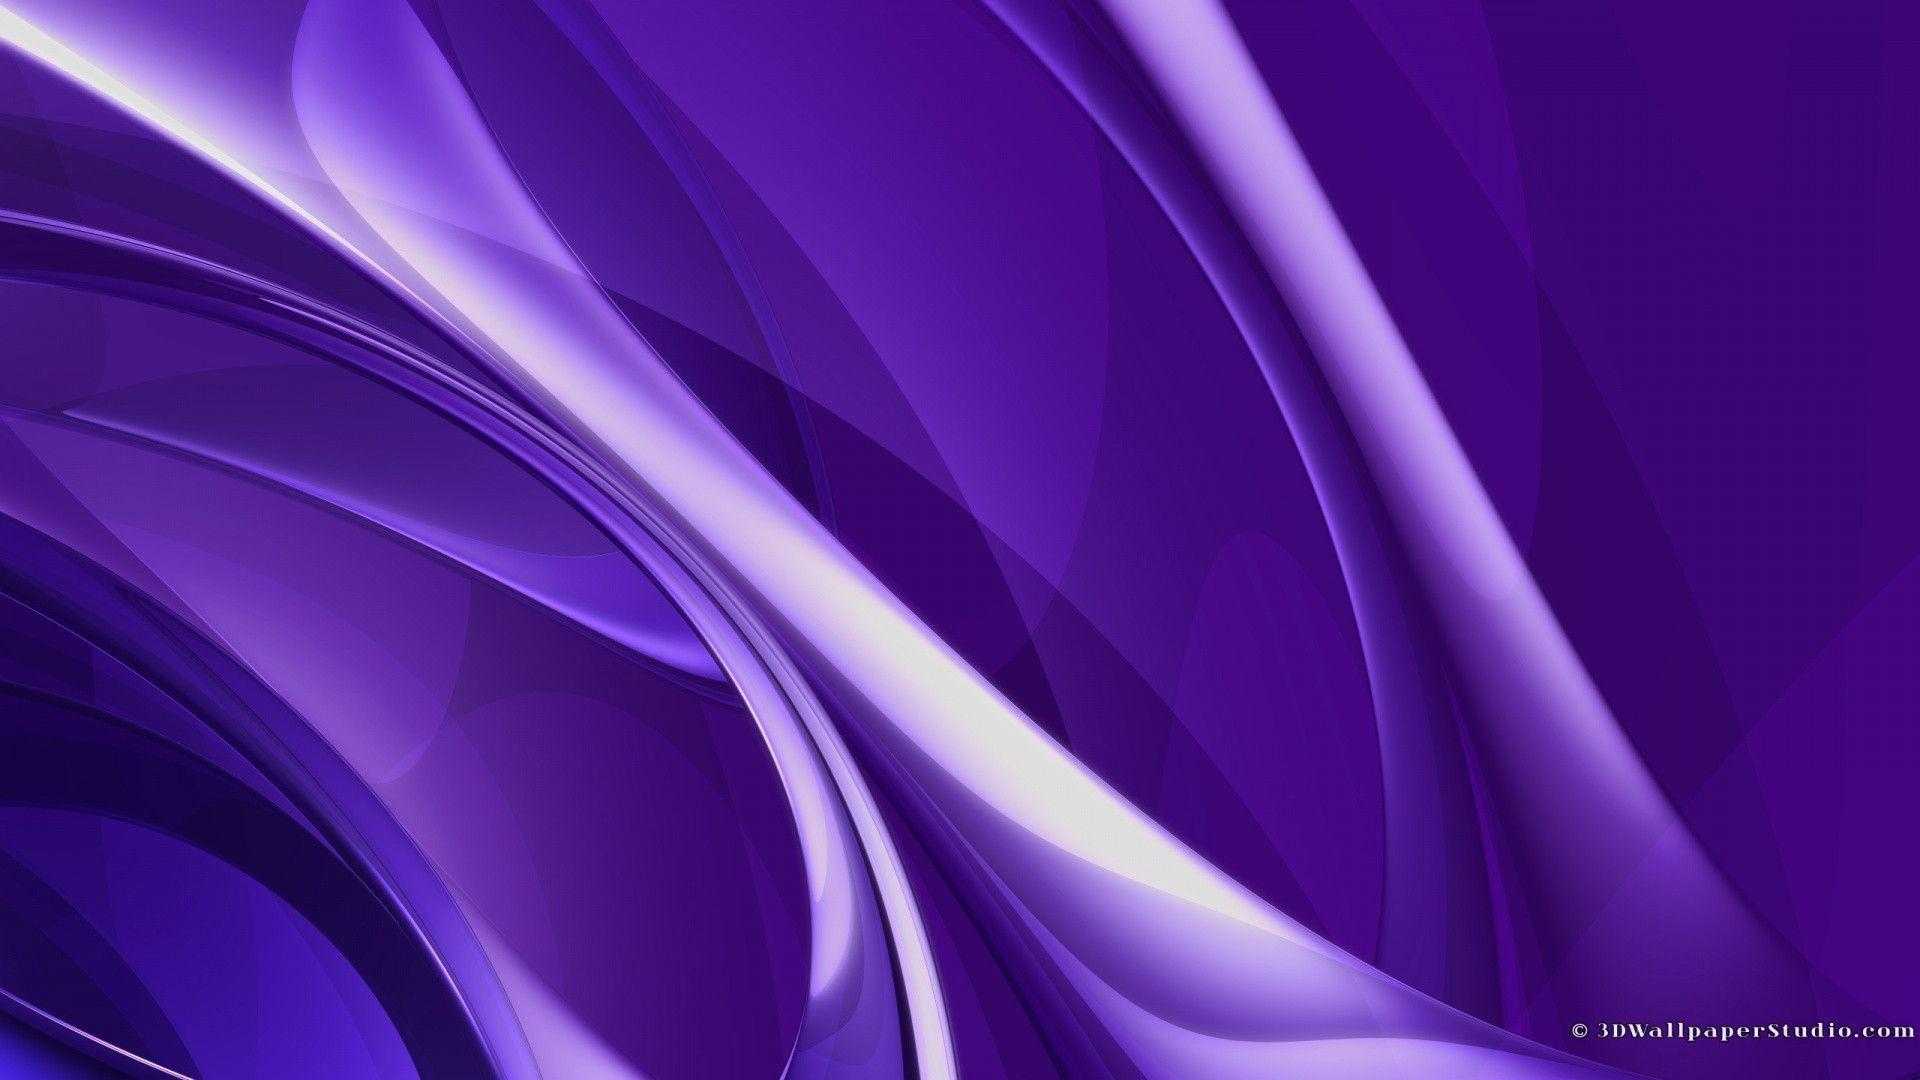 Purple Abstract Wallpaper 8 Cool Background 1920x1080 HD Wallpaper